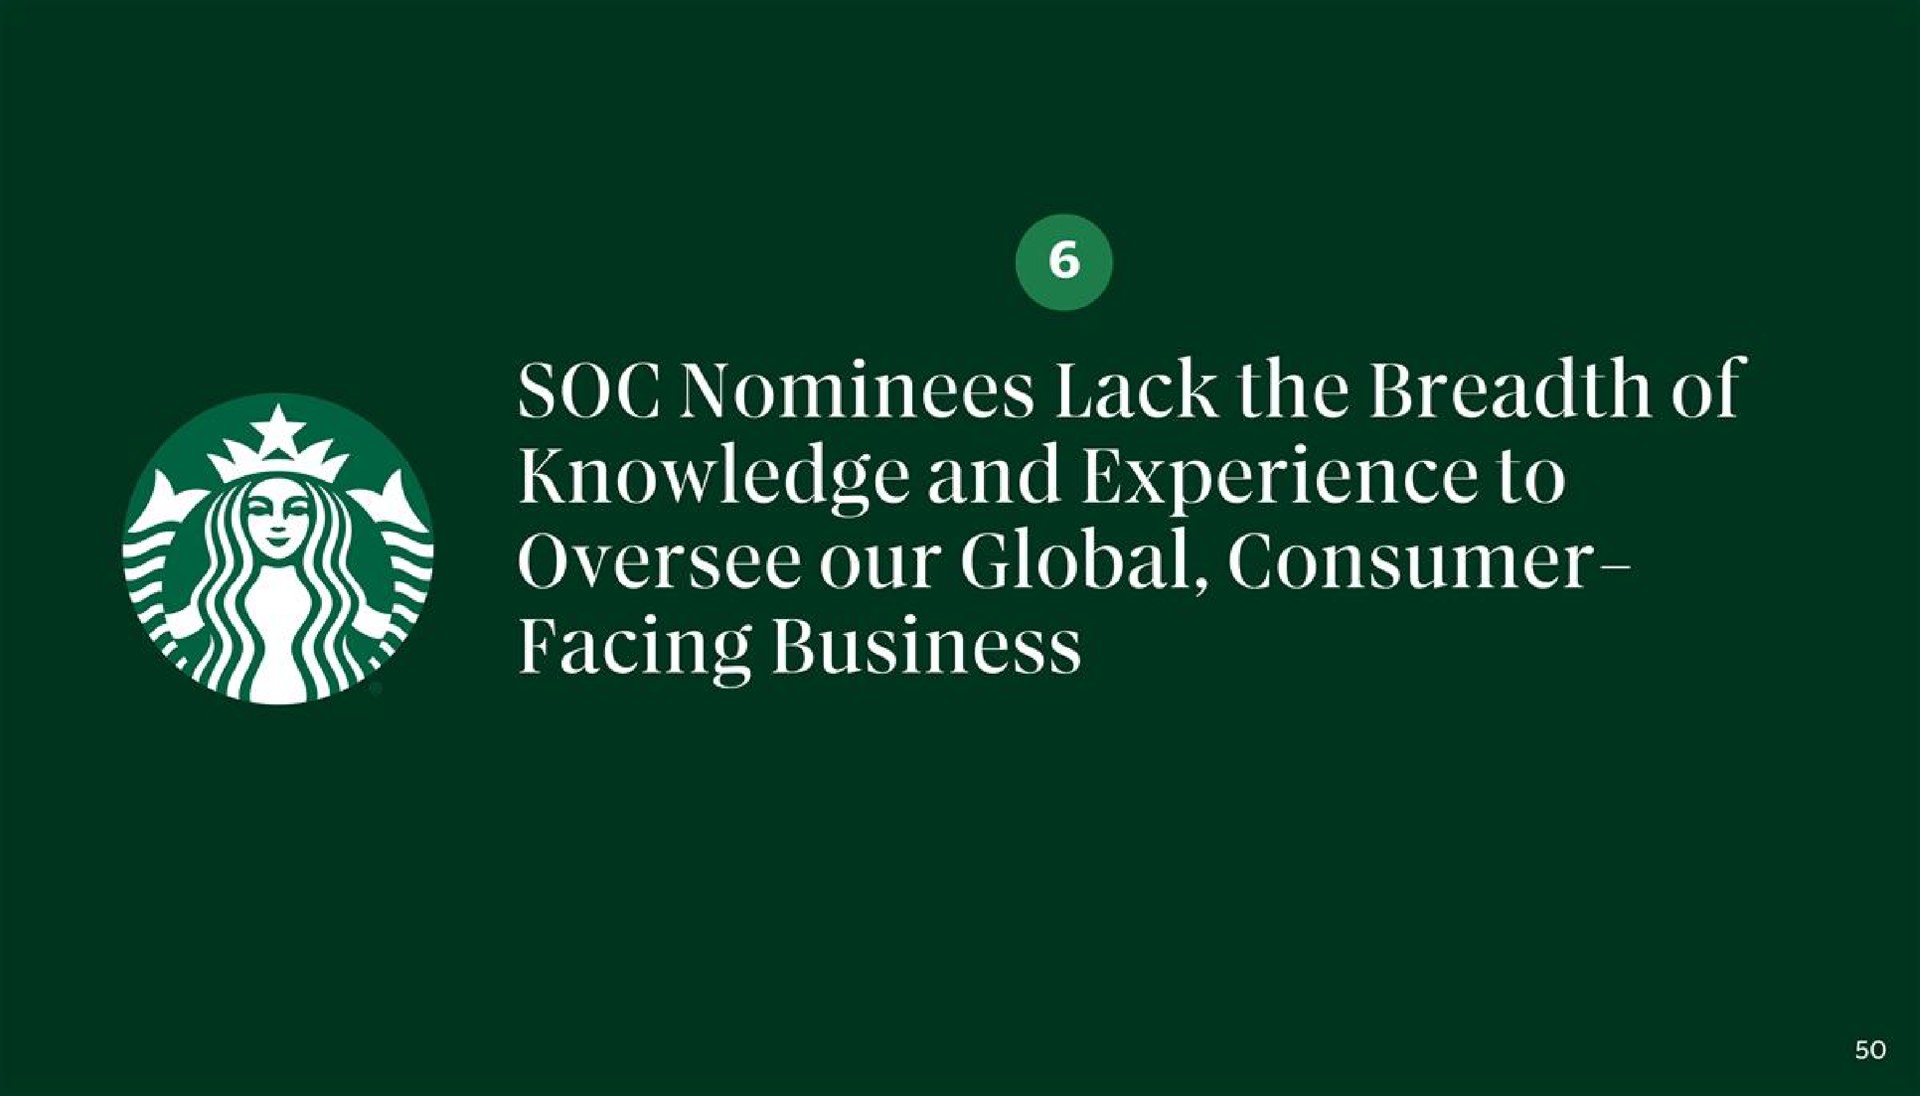 soc nominees lack the breadth of knowledge and experience to oversee our global consumer facing business | Starbucks